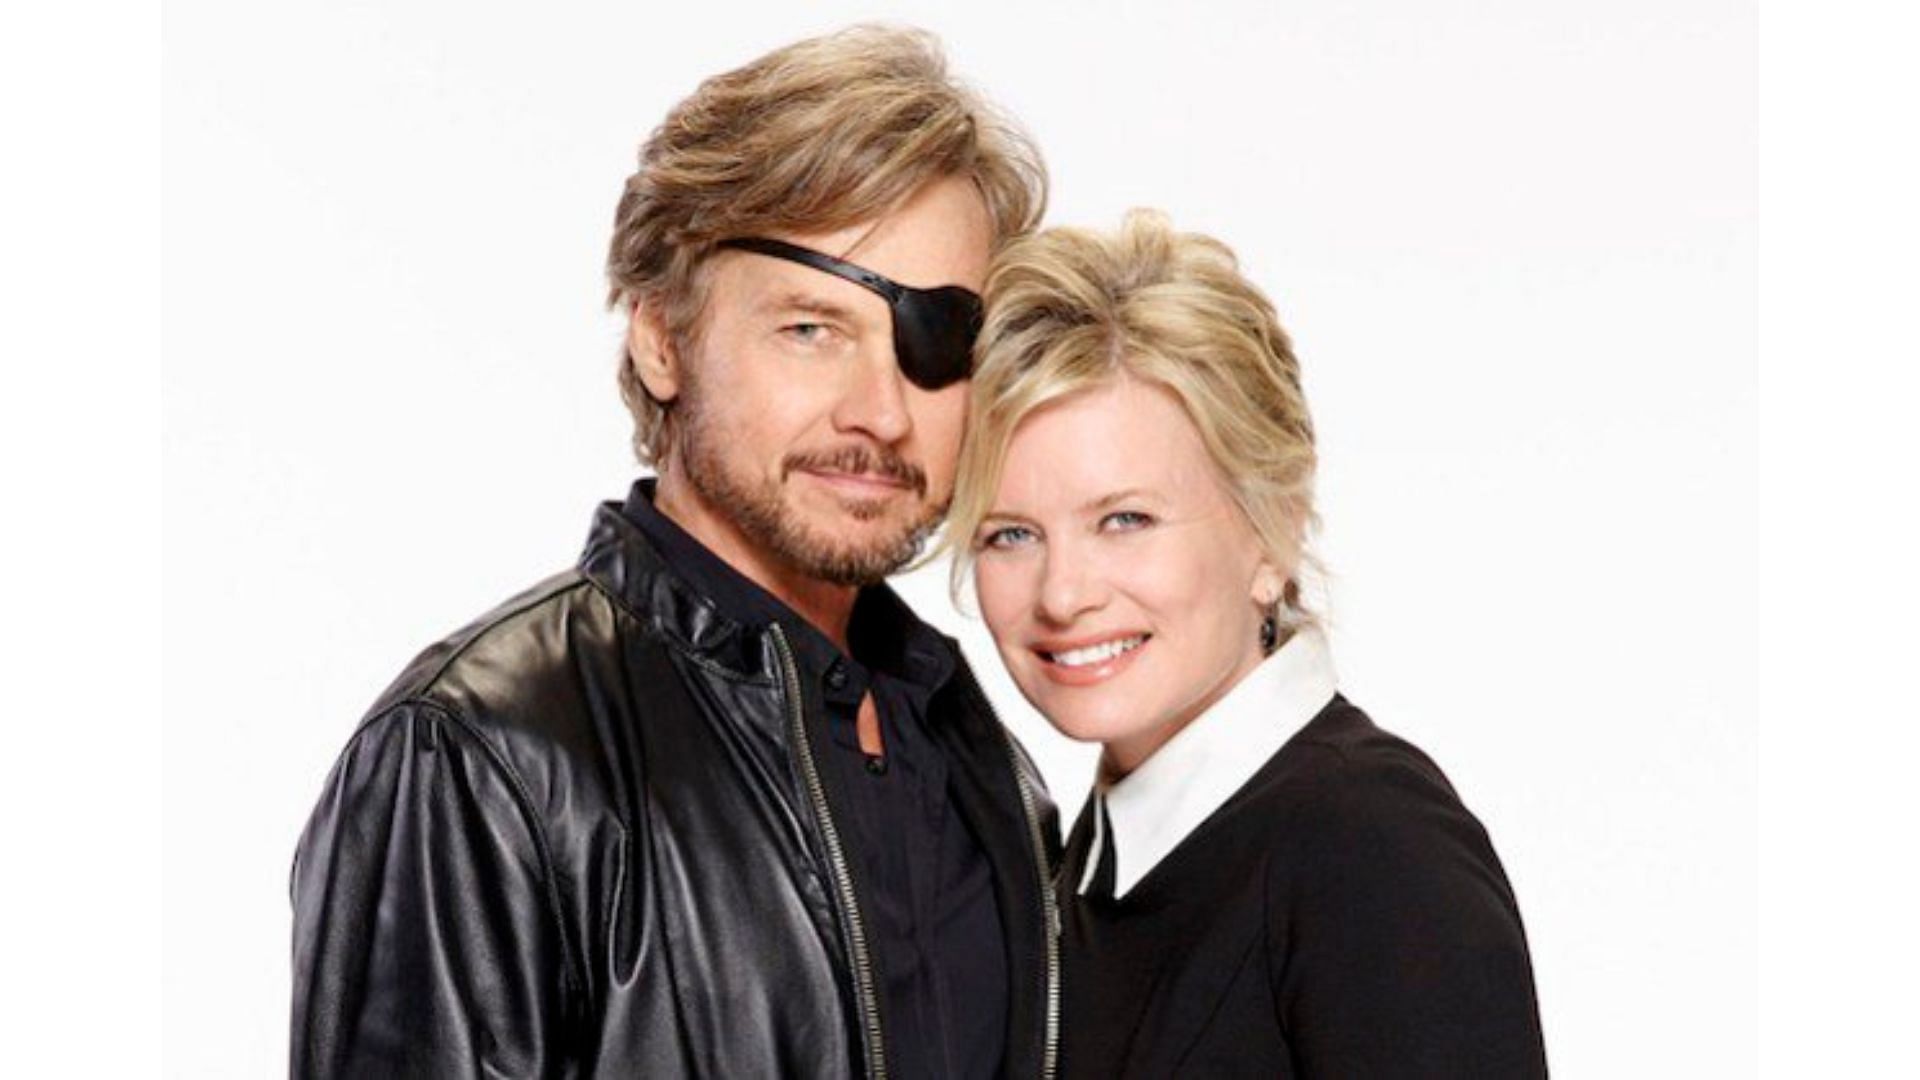 Steve and Kayla make a super couple in the series (Image via X@newstermer)